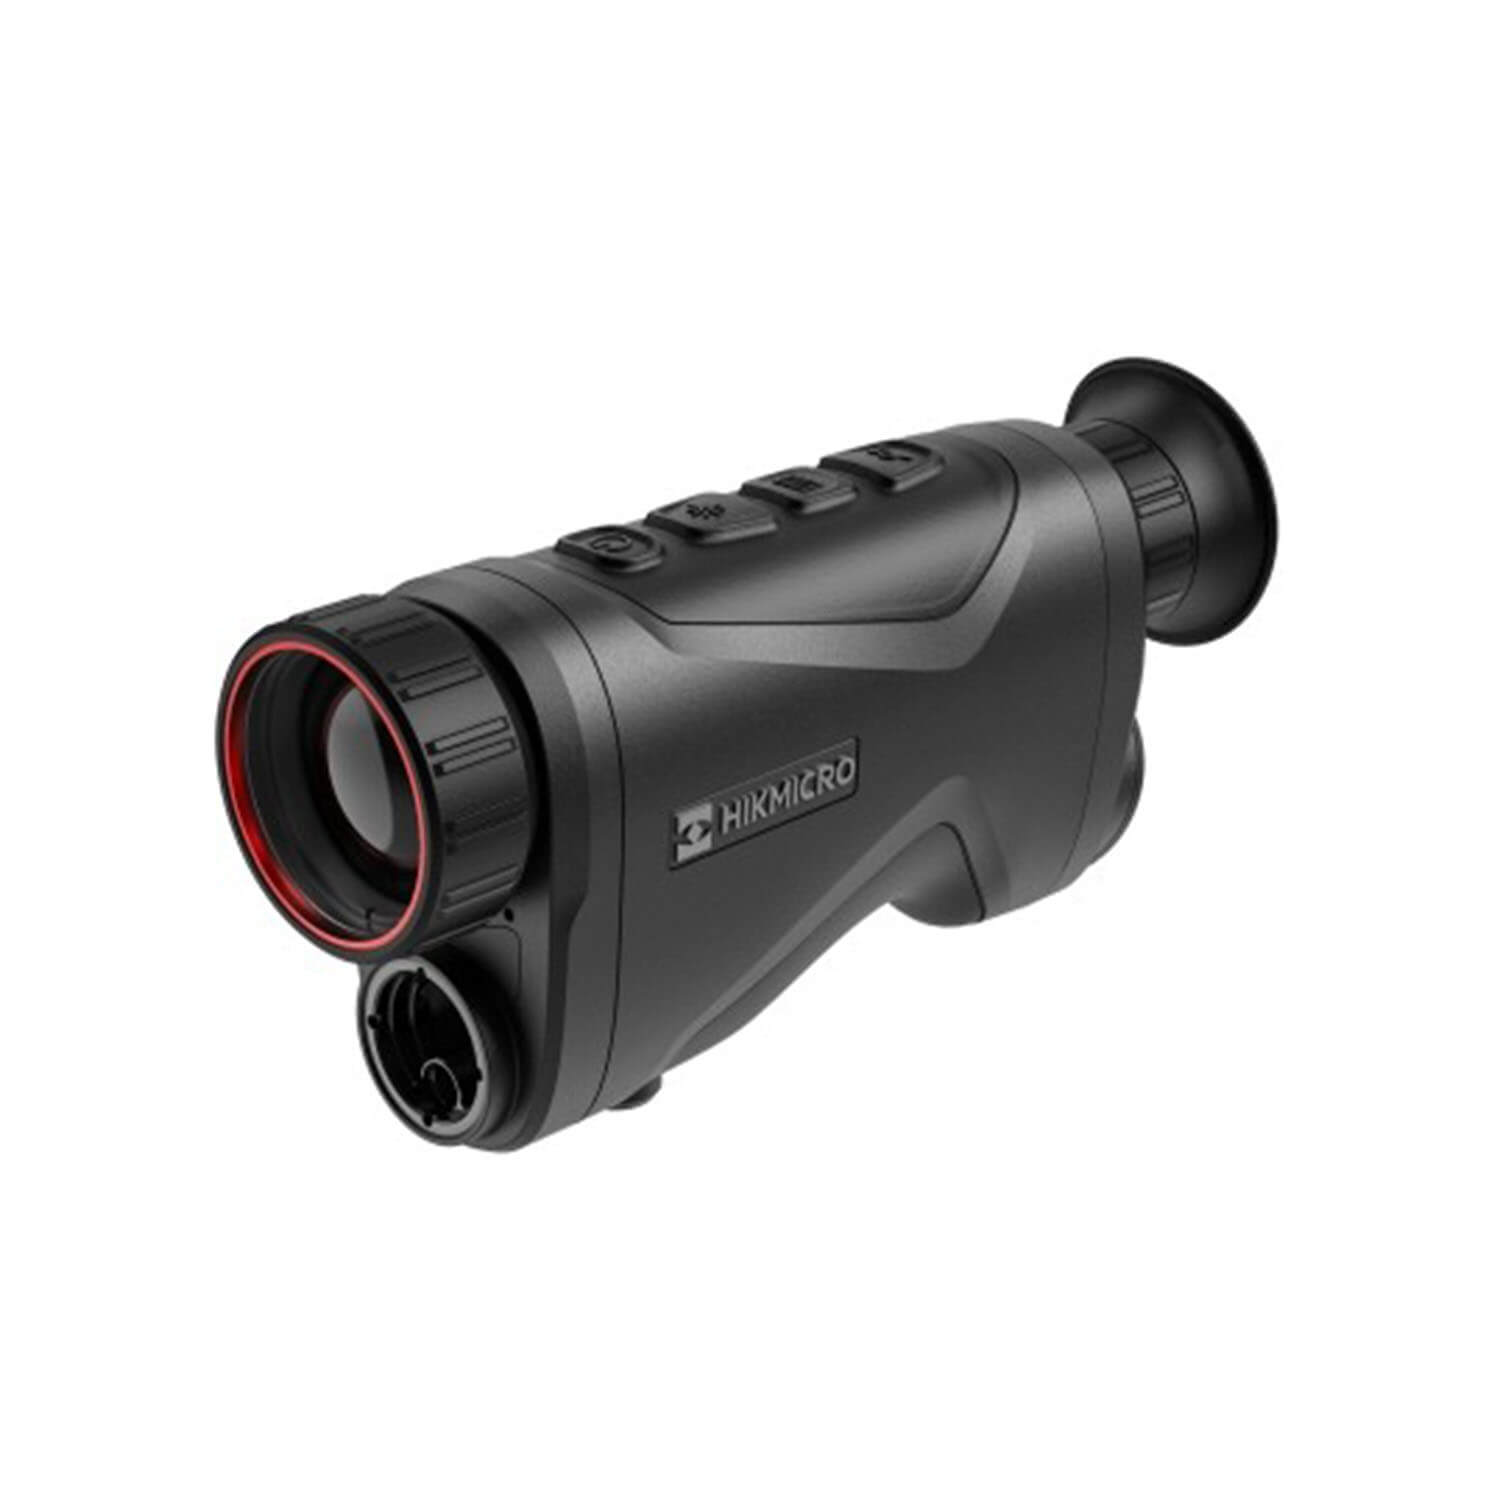 Hikmicro thermal imaging scope Condor CQ35L - Night Vision Devices